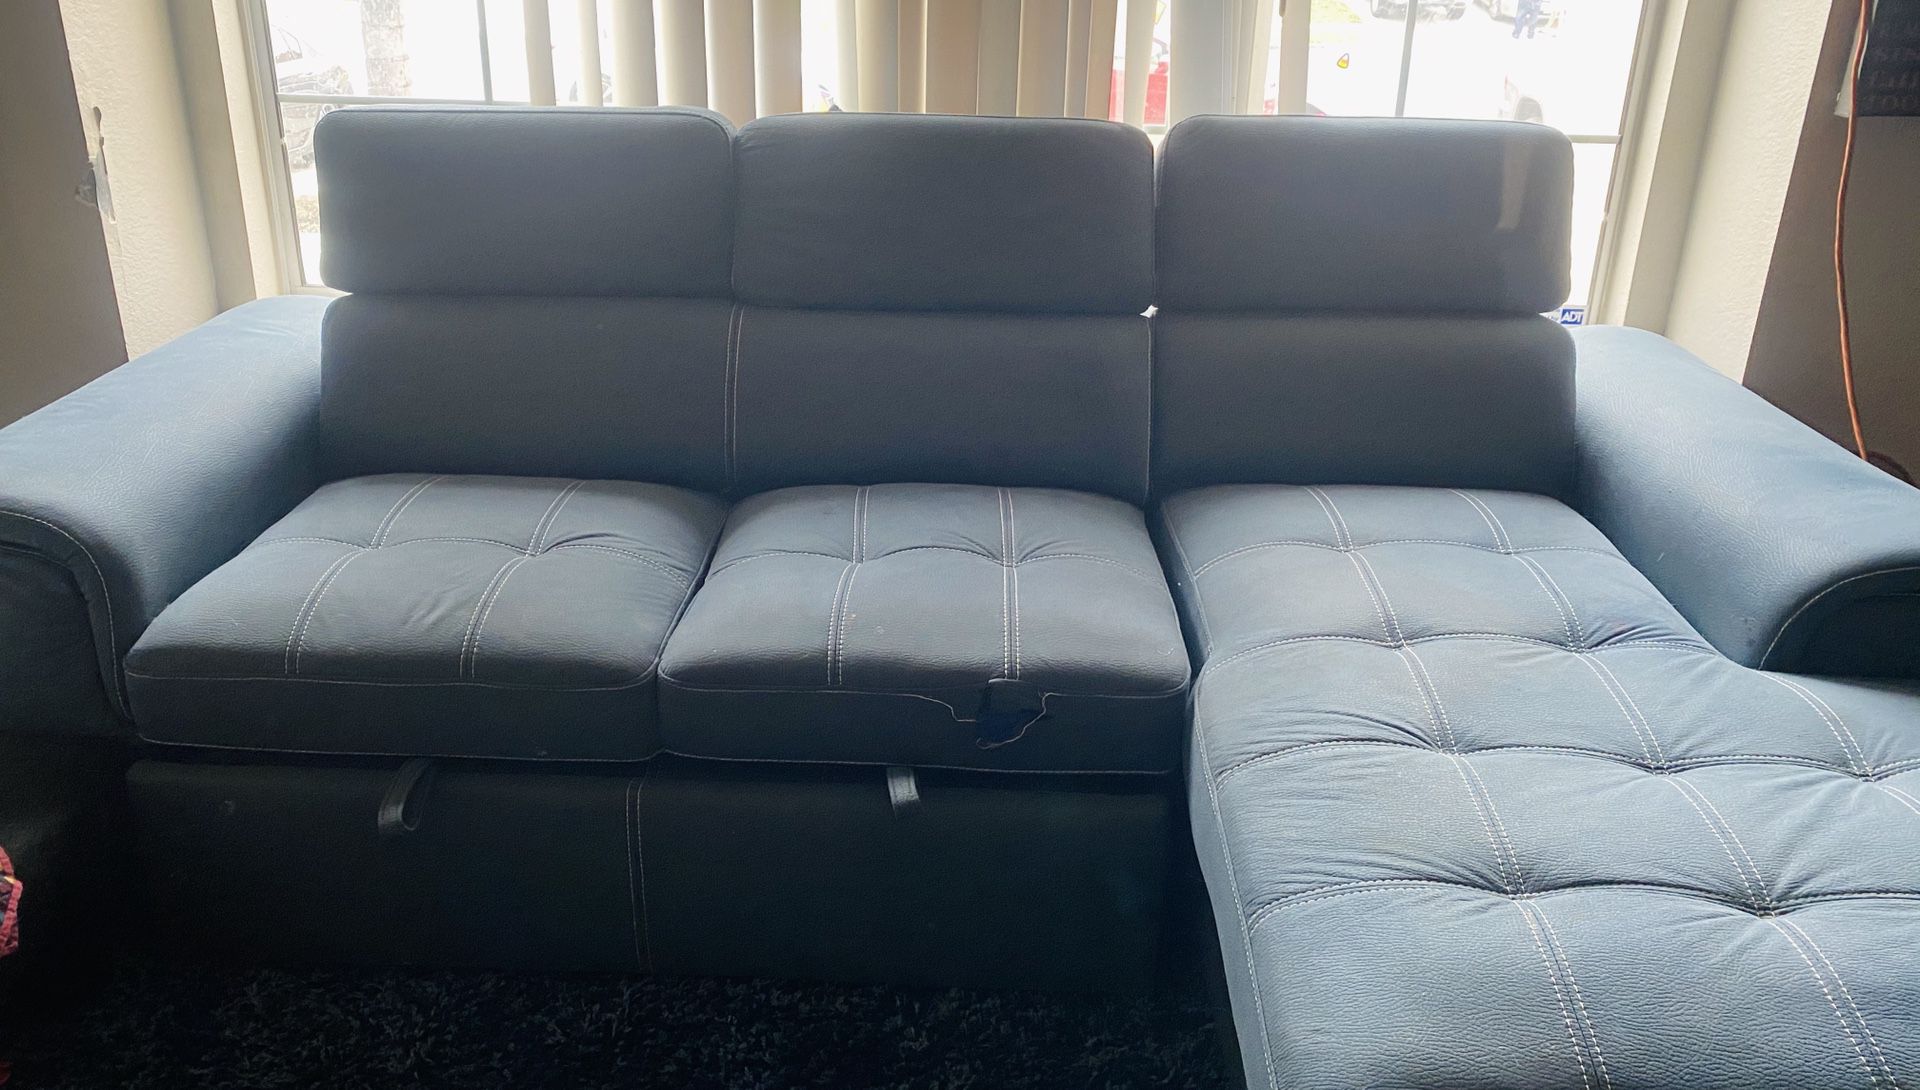 Couch bed